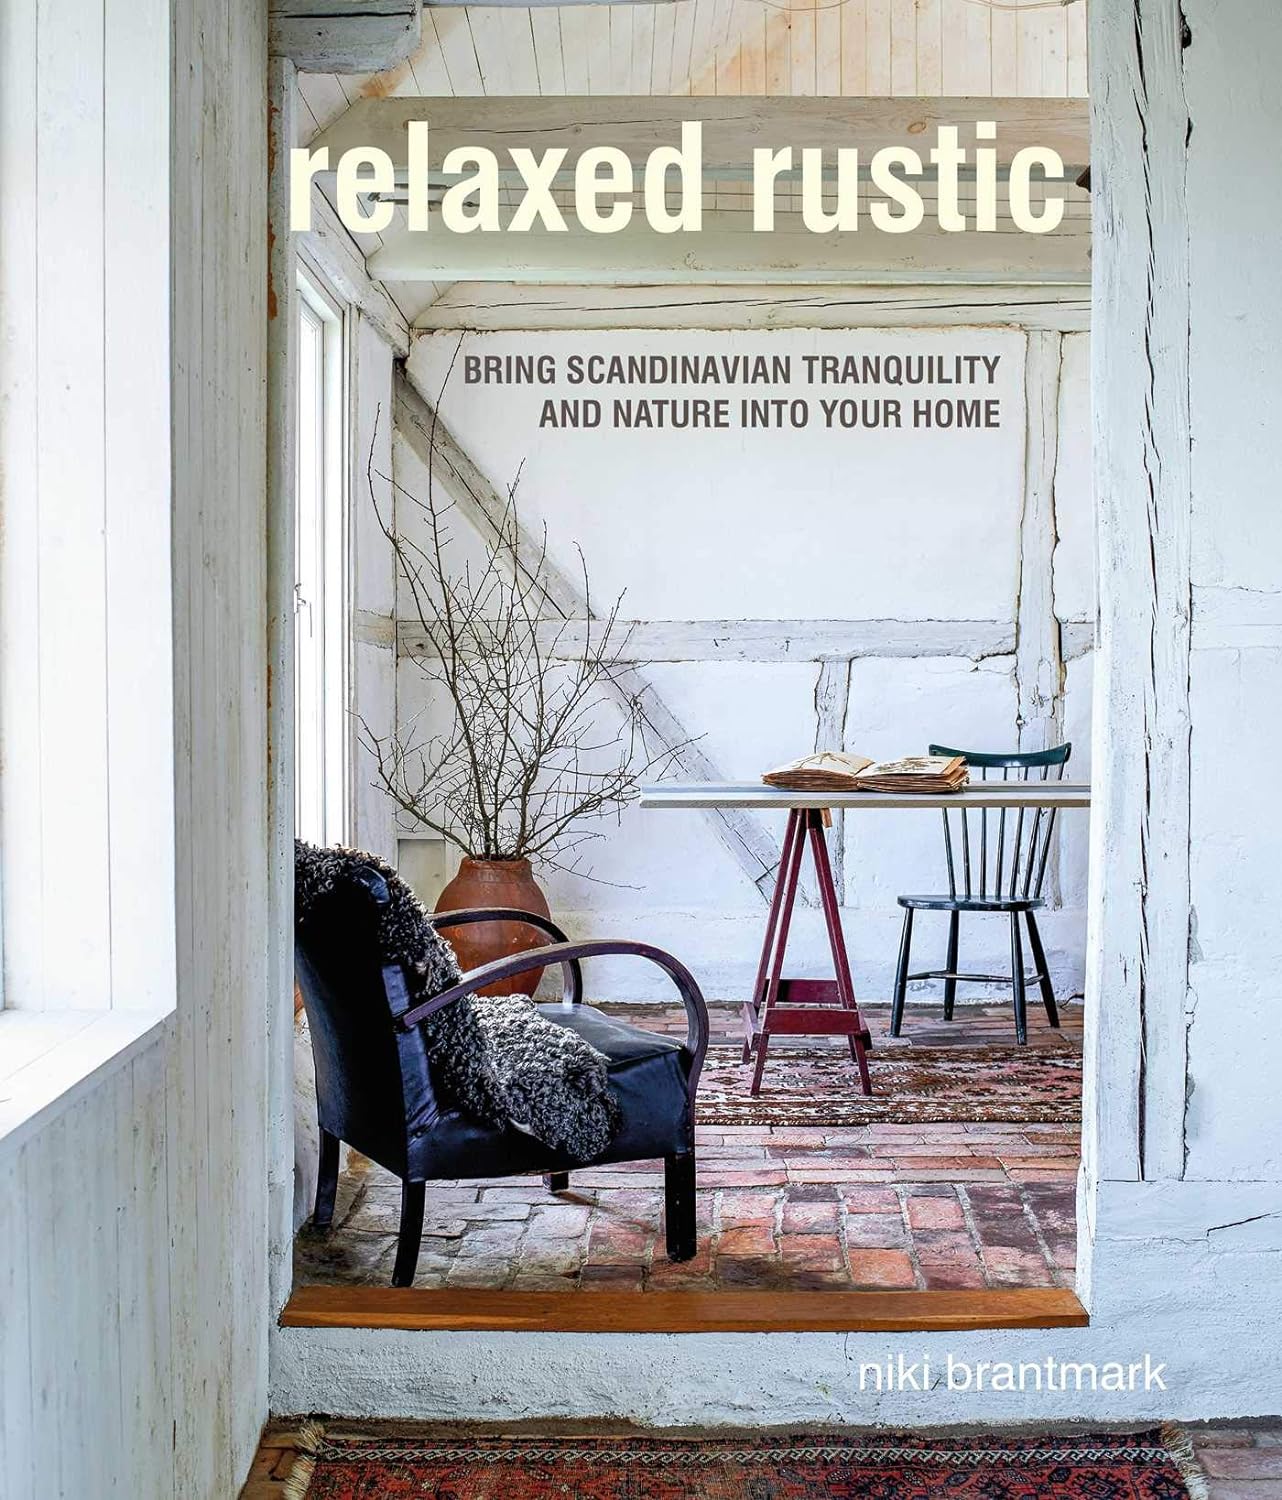 

Relaxed Rustic: Bring Scandinavian tranquility and nature into your home